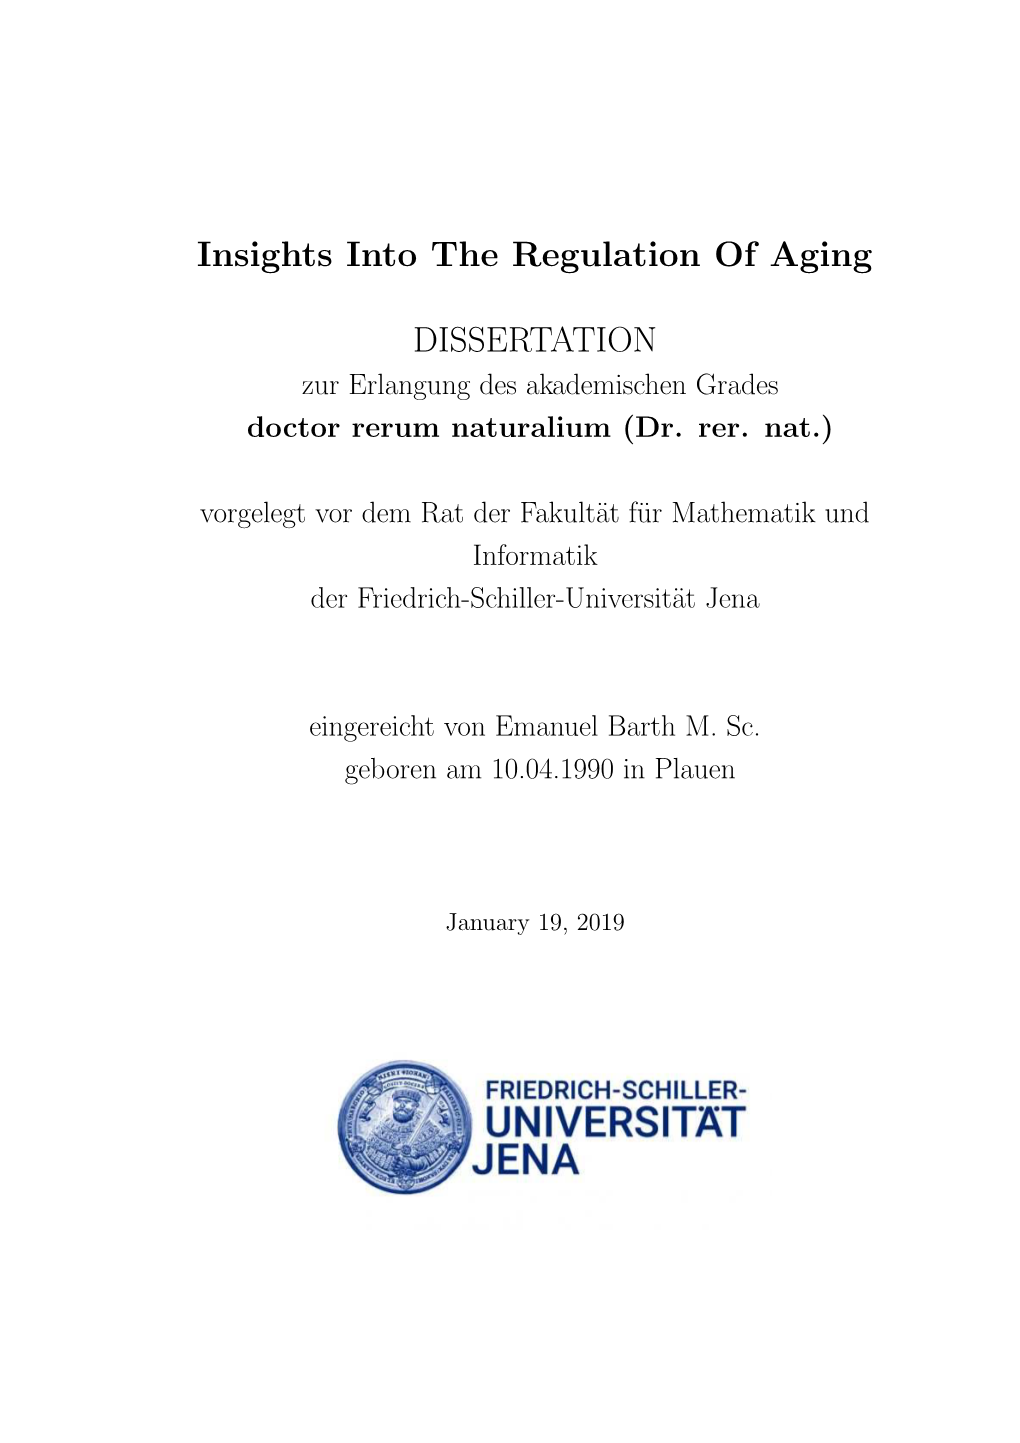 Insights Into the Regulation of Aging DISSERTATION